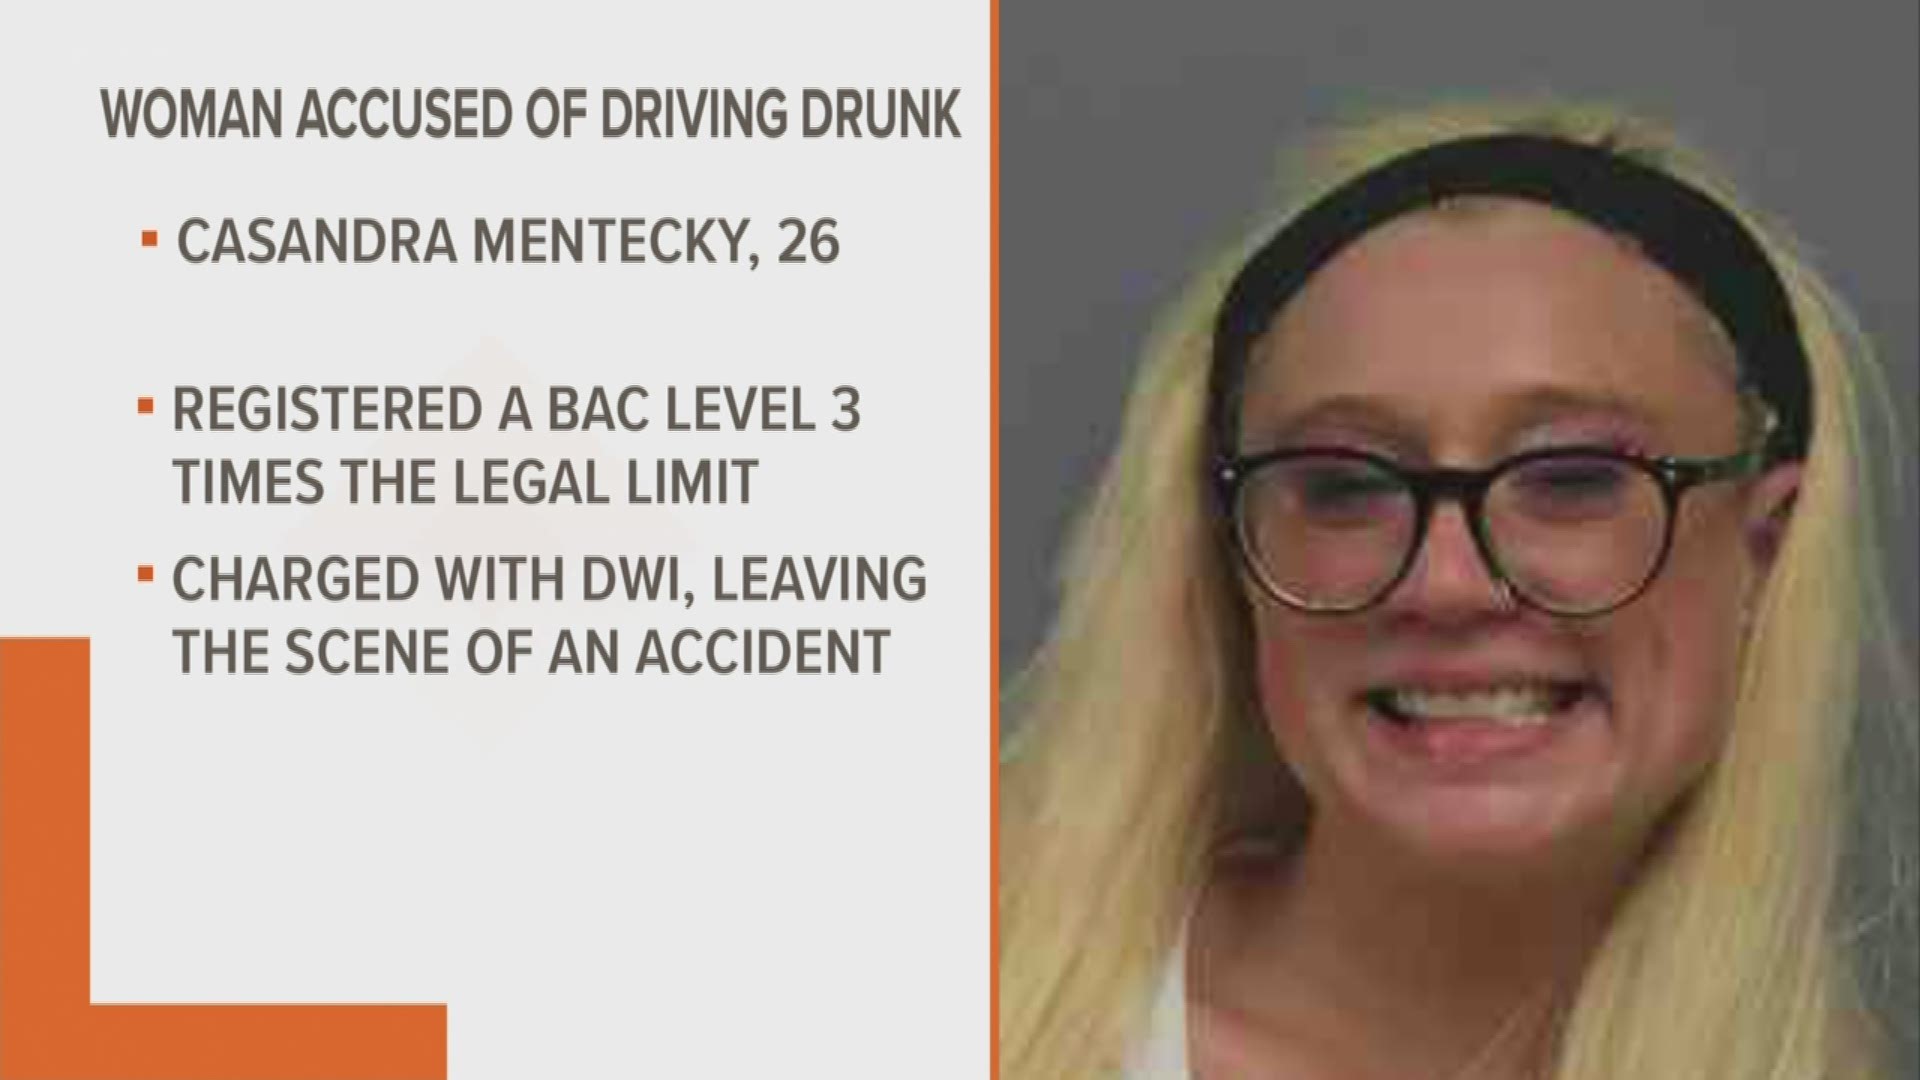 Buffalo Woman Arrested For DWI, Hit And Run